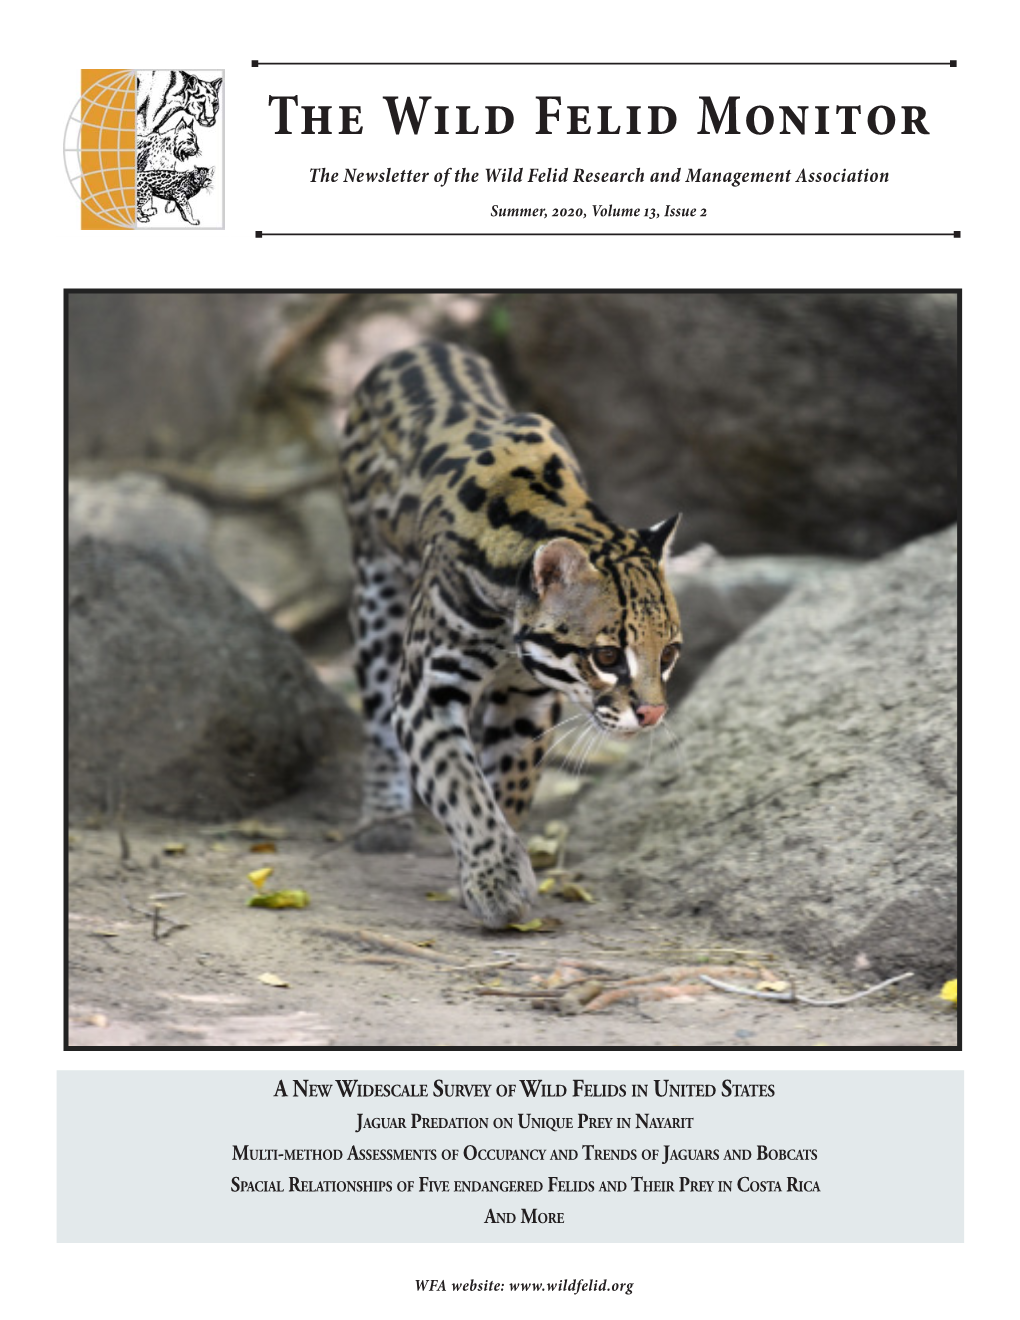 The Wild Felid Monitor the Newsletter of the Wild Felid Research and Management Association Summer, 2020, Volume 13, Issue 2